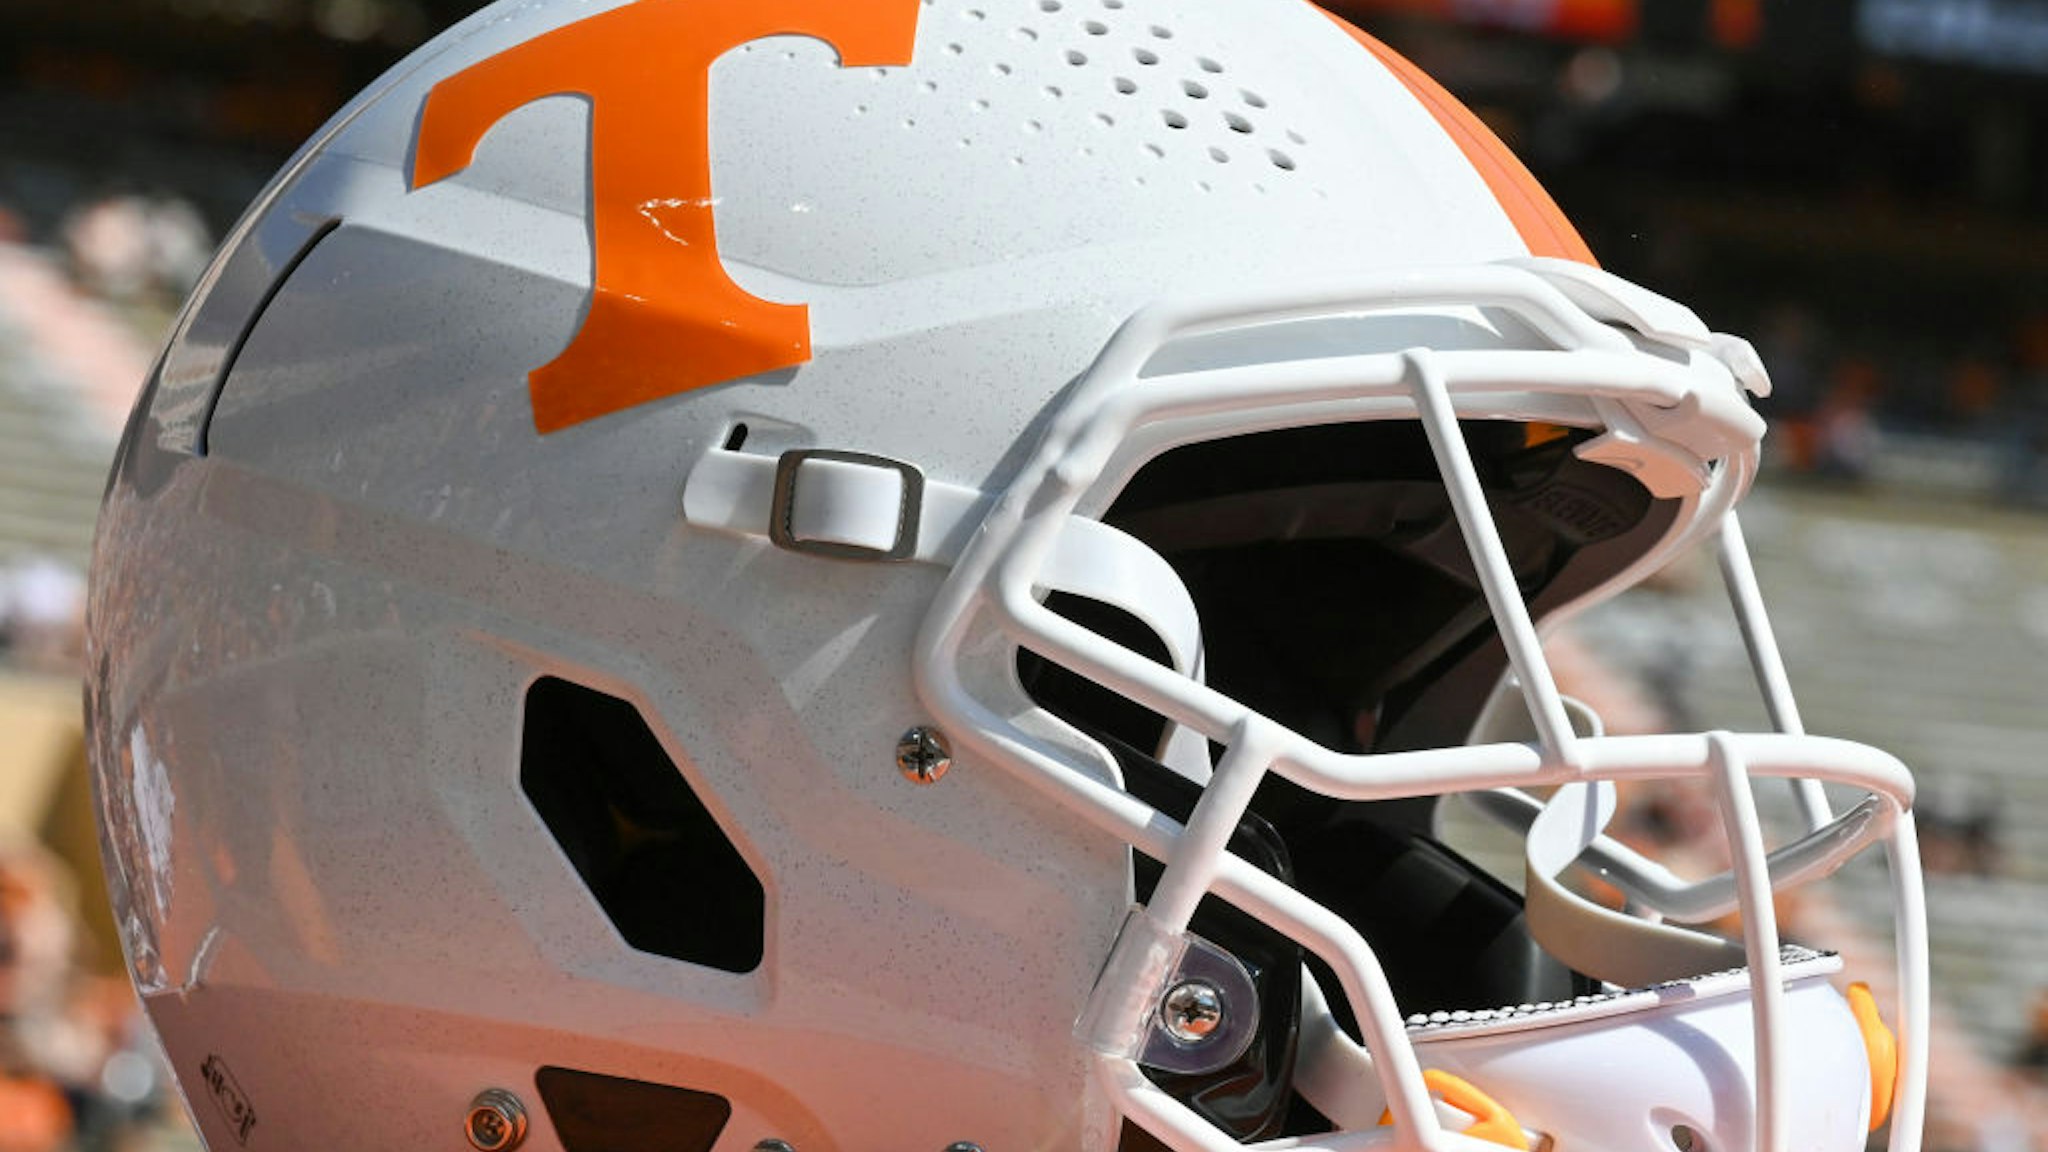 KNOXVILLE, TN - SEPTEMBER 11: A Tennessee helmet during the NCAA football game between the Pittsburgh Panthers and the Tennessee Volunteers on September 11, 2021, at Neyland Stadium in Knoxville, TN. (Photo by Kevin Langley/Icon Sportswire via Getty Images)